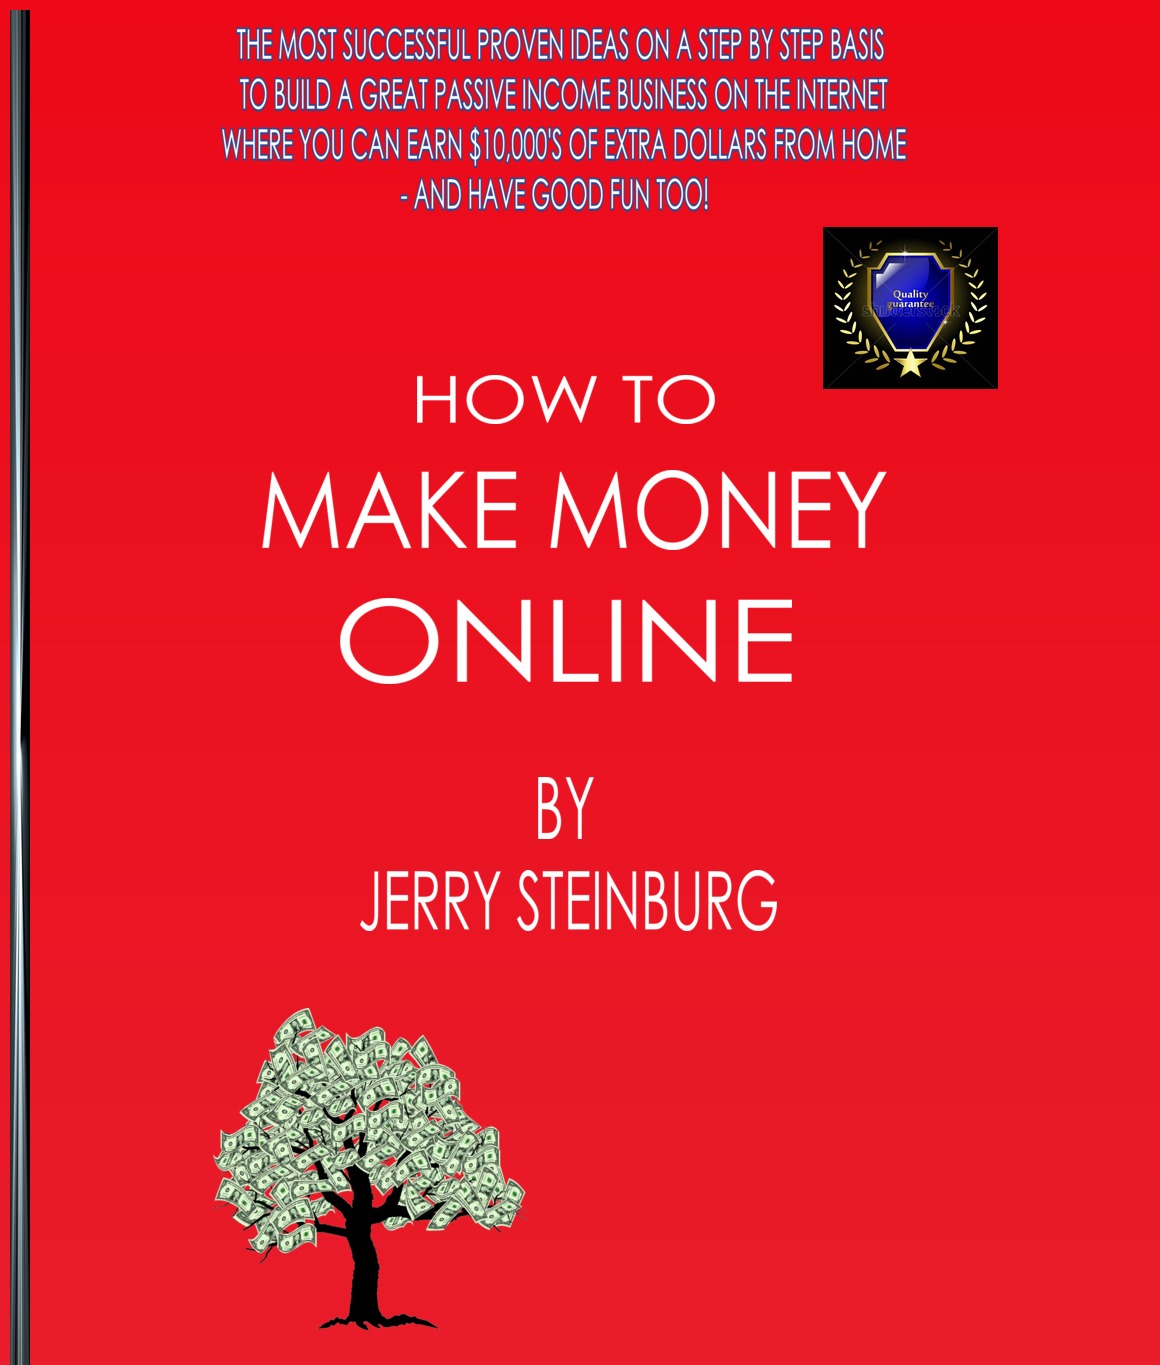 How to make money online by Jerry Steinburg